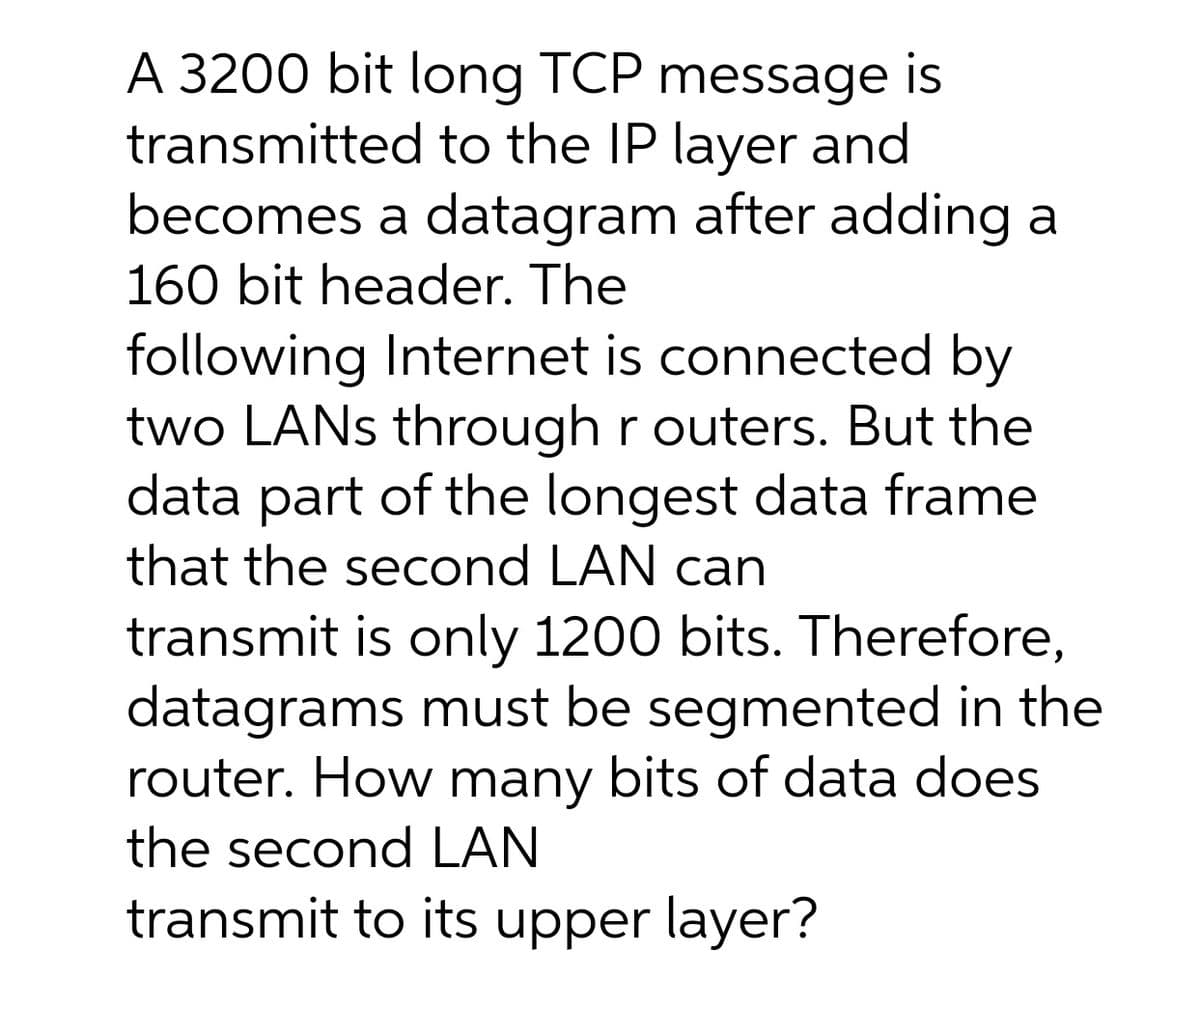 A 3200 bit long TCP message is
transmitted to the IP layer and
becomes a datagram after adding a
160 bit header. The
following Internet is connected by
two LANS through r outers. But the
data part of the longest data frame
that the second LAN can
transmit is only 1200 bits. Therefore,
datagrams must be segmented in the
router. How many bits of data does
the second LAN
transmit to its upper layer?
